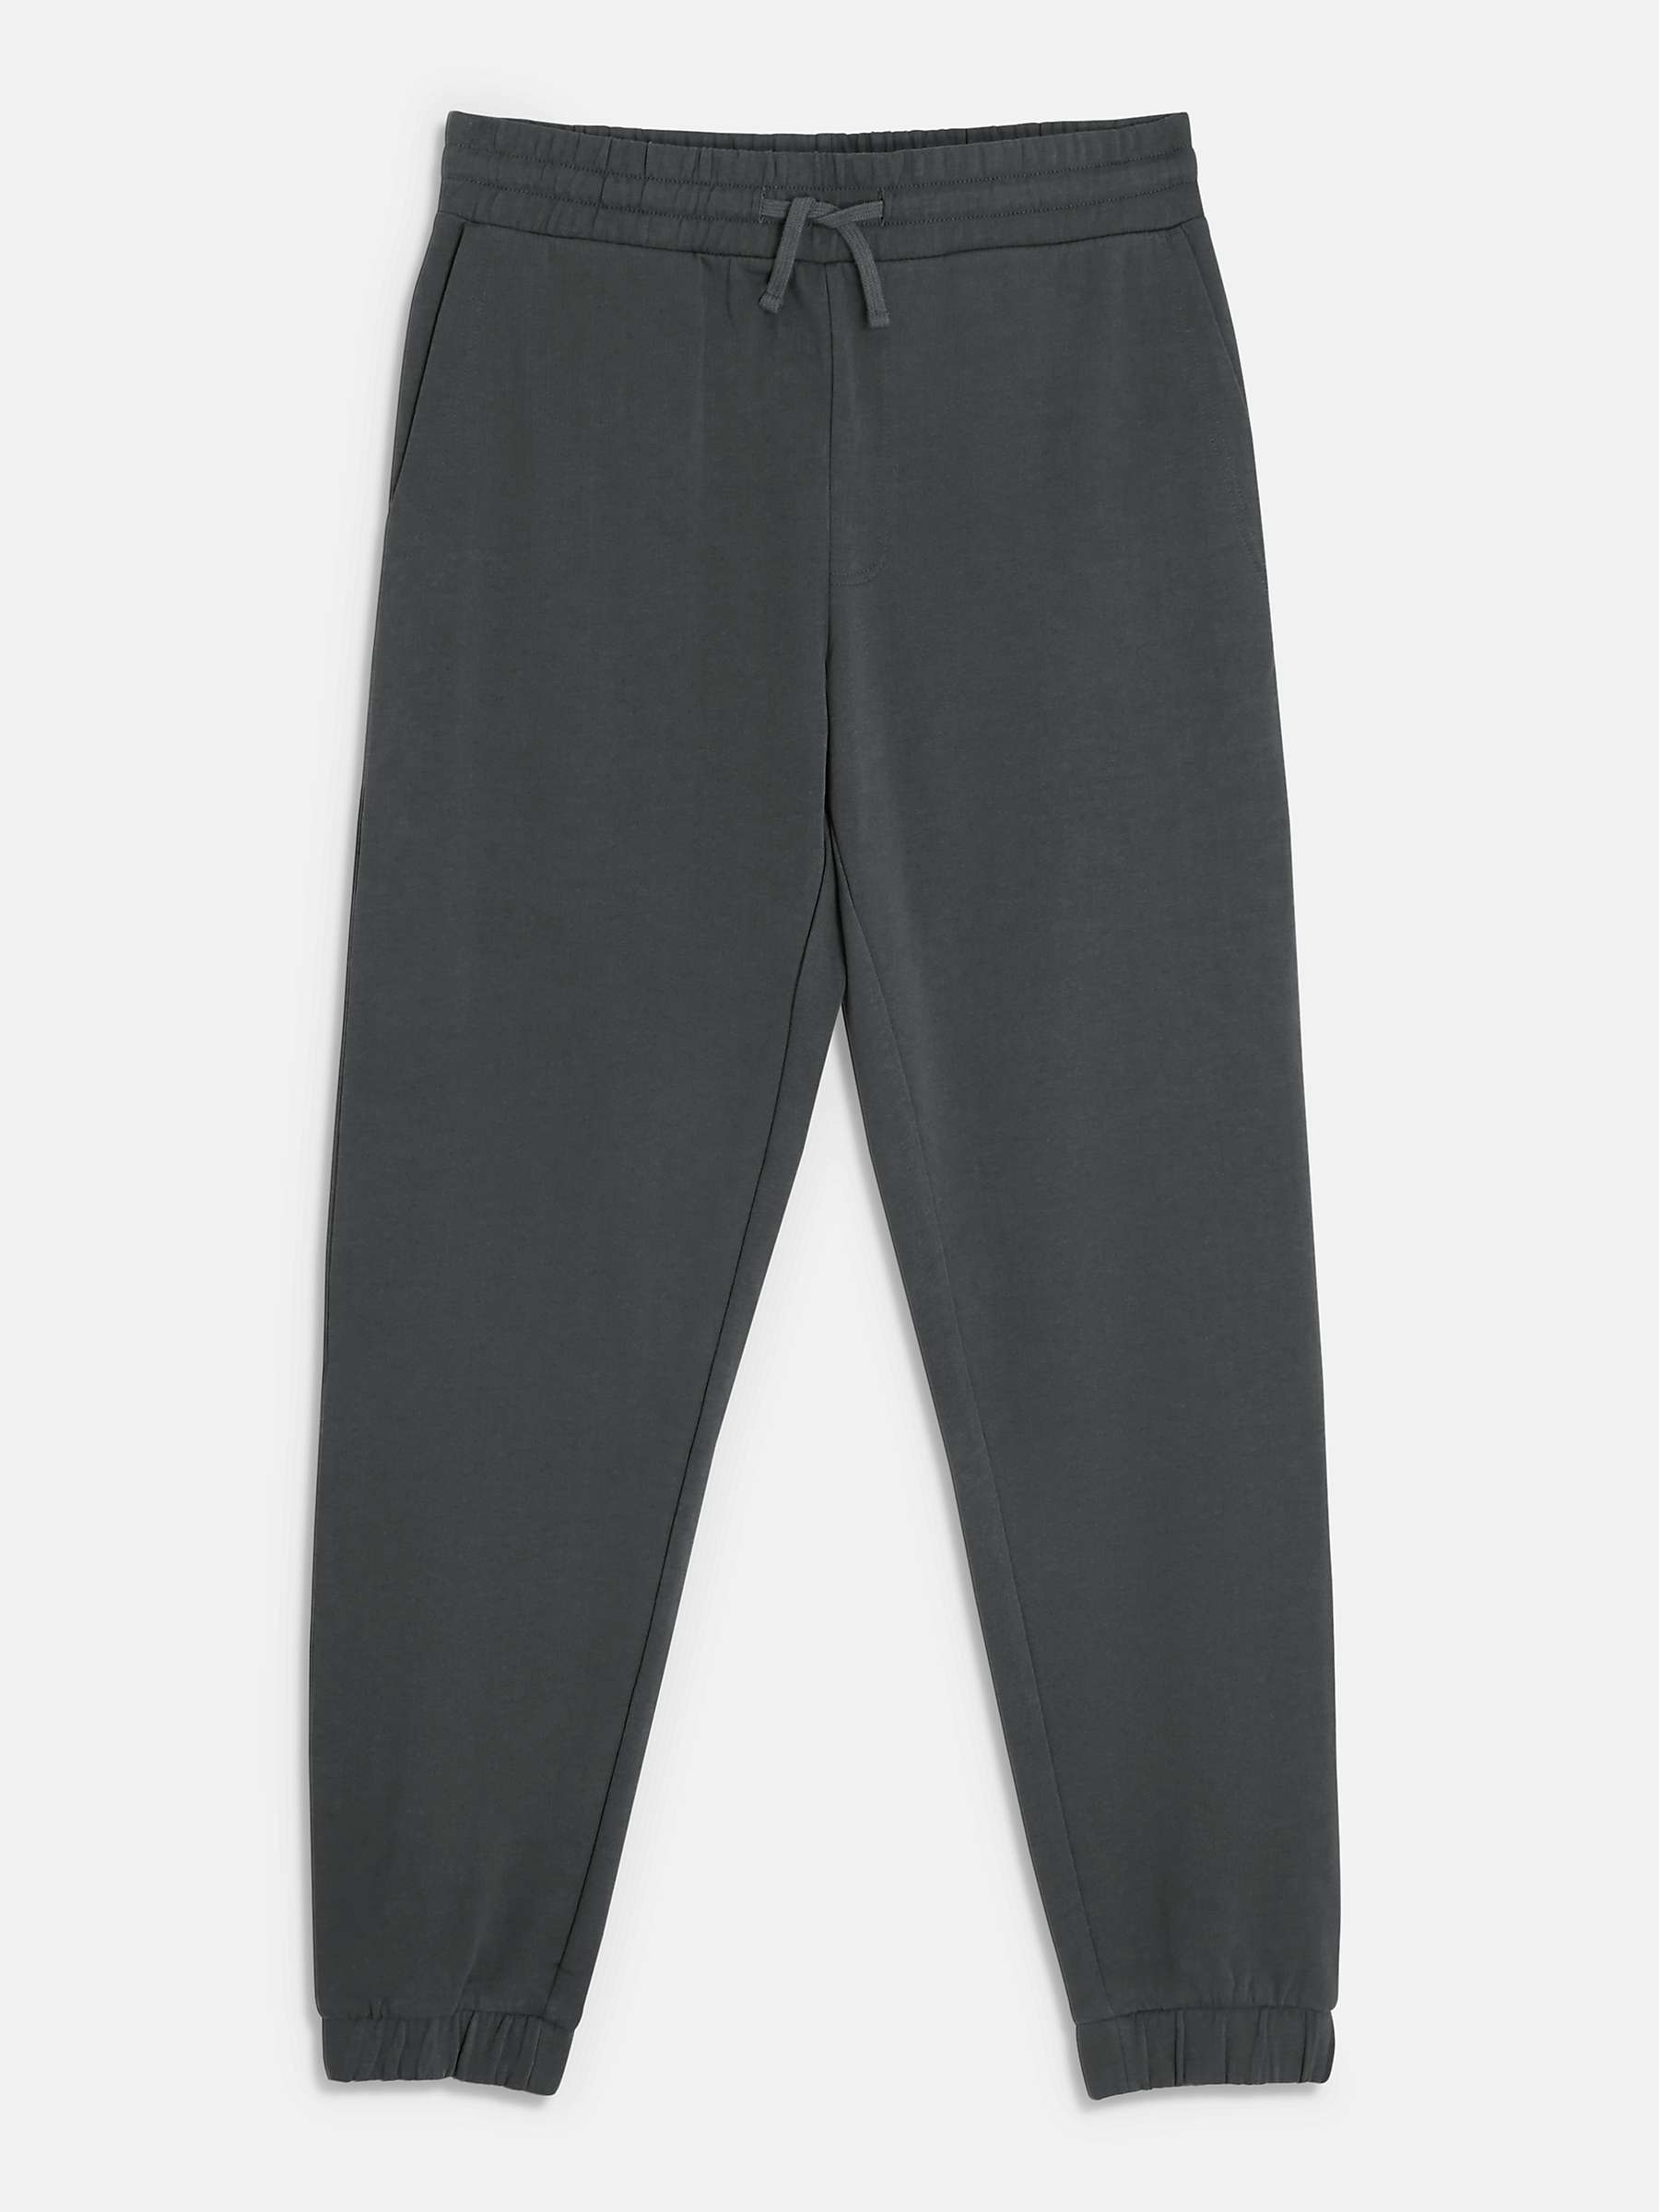 Buy John Lewis ANYDAY Cotton Joggers Online at johnlewis.com